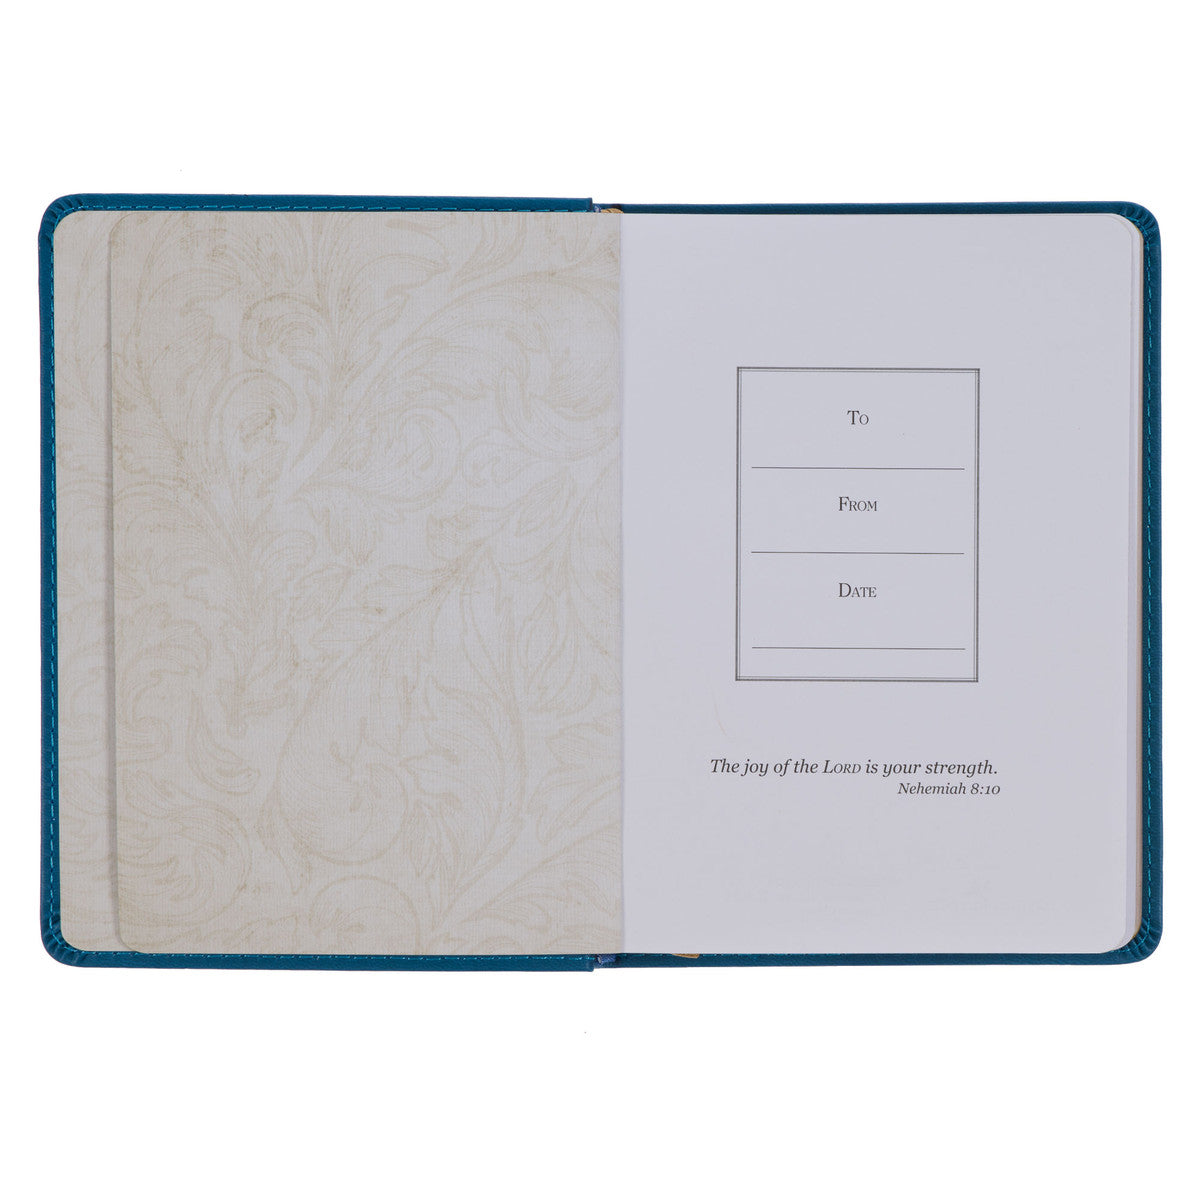 Hope in the LORD Golden Leaf Blue Faux Leather Handy-size Journal - Isaiah 40:31 - The Christian Gift Company